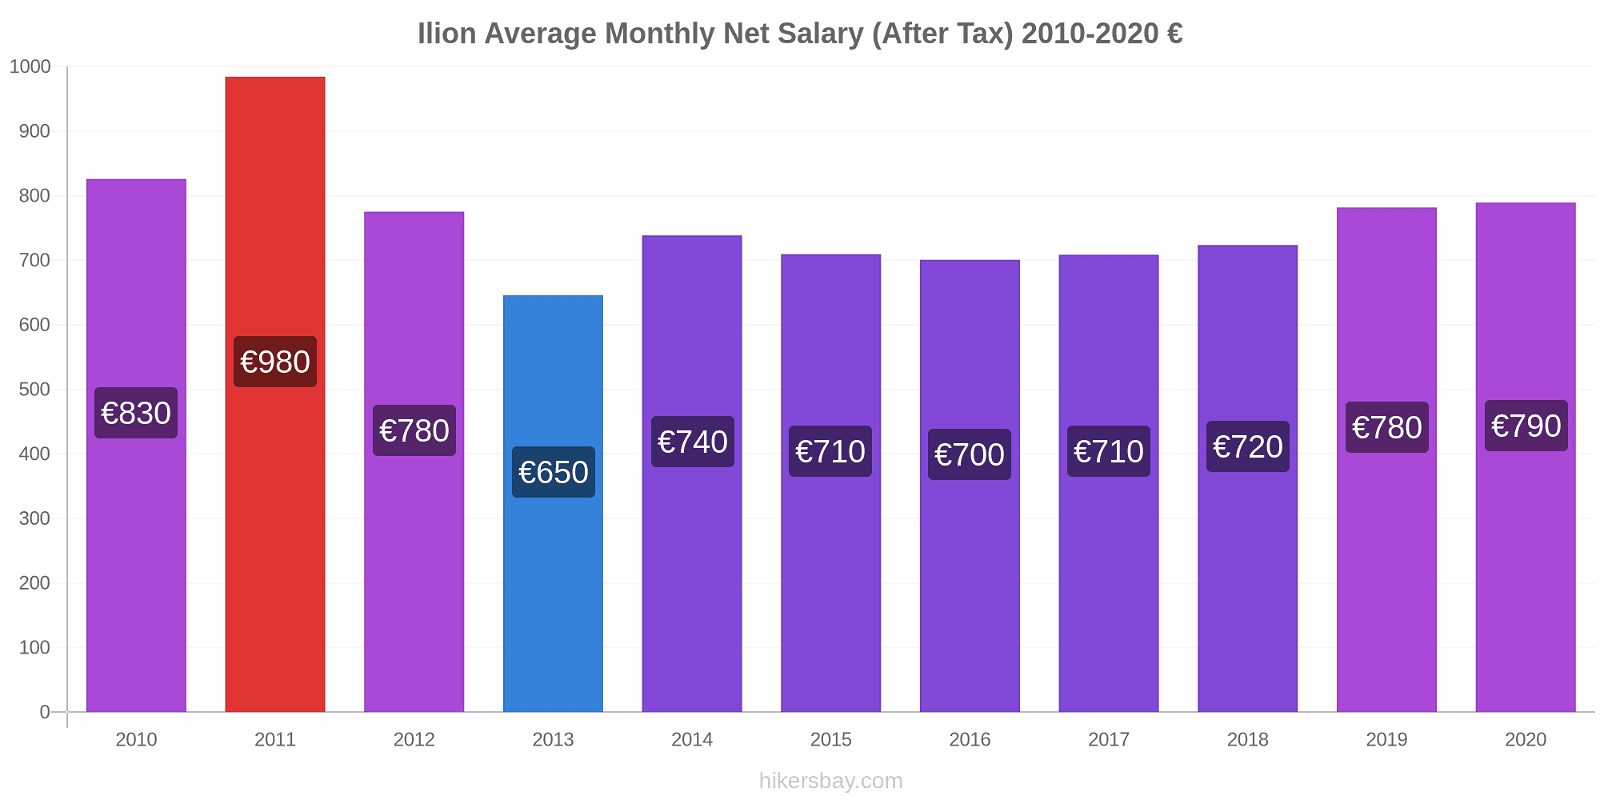 Ilion price changes Average Monthly Net Salary (After Tax) hikersbay.com